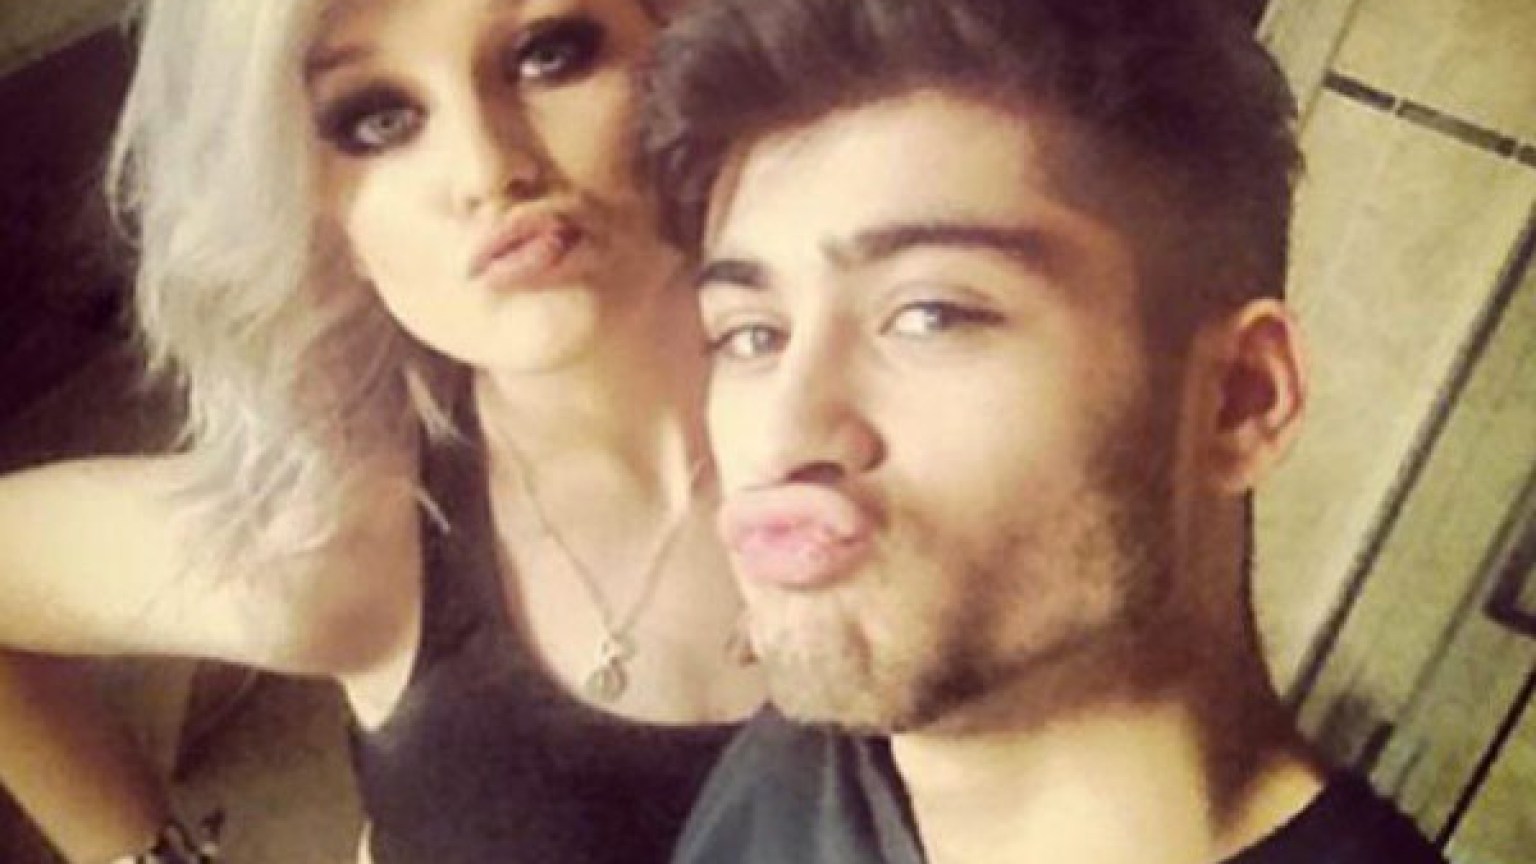 Zayn Malik And Perrie Edwards On Instagram — Couple Posts Cute Selfies Online Hollywood Life 